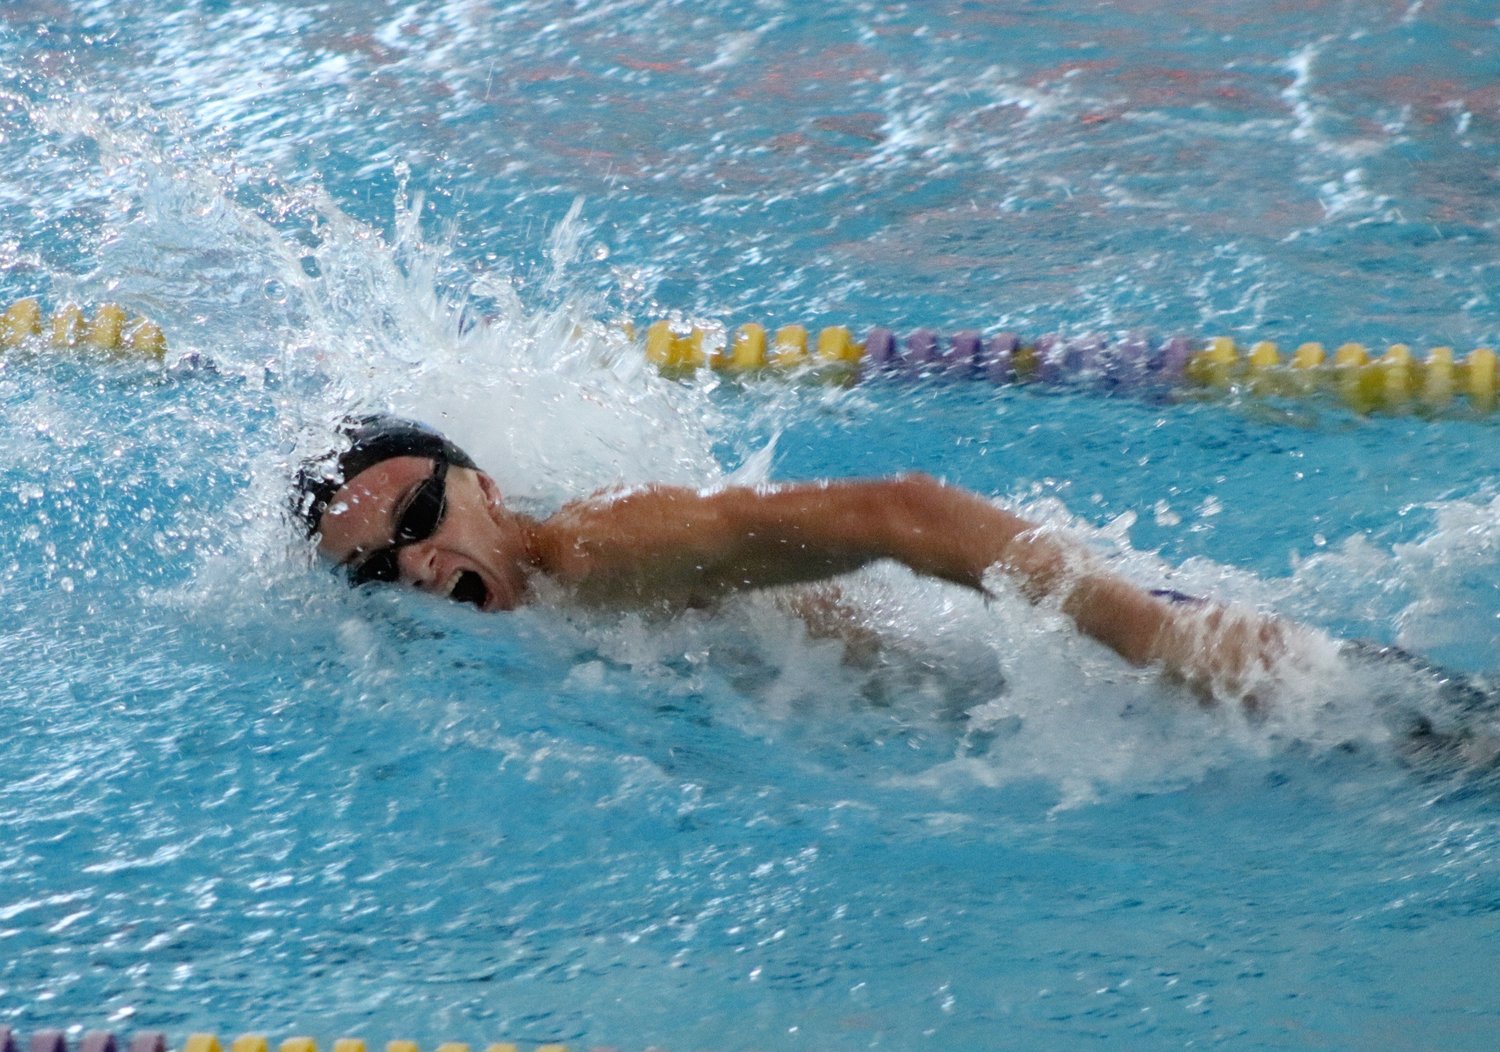 Drew Henry swims the freestyle